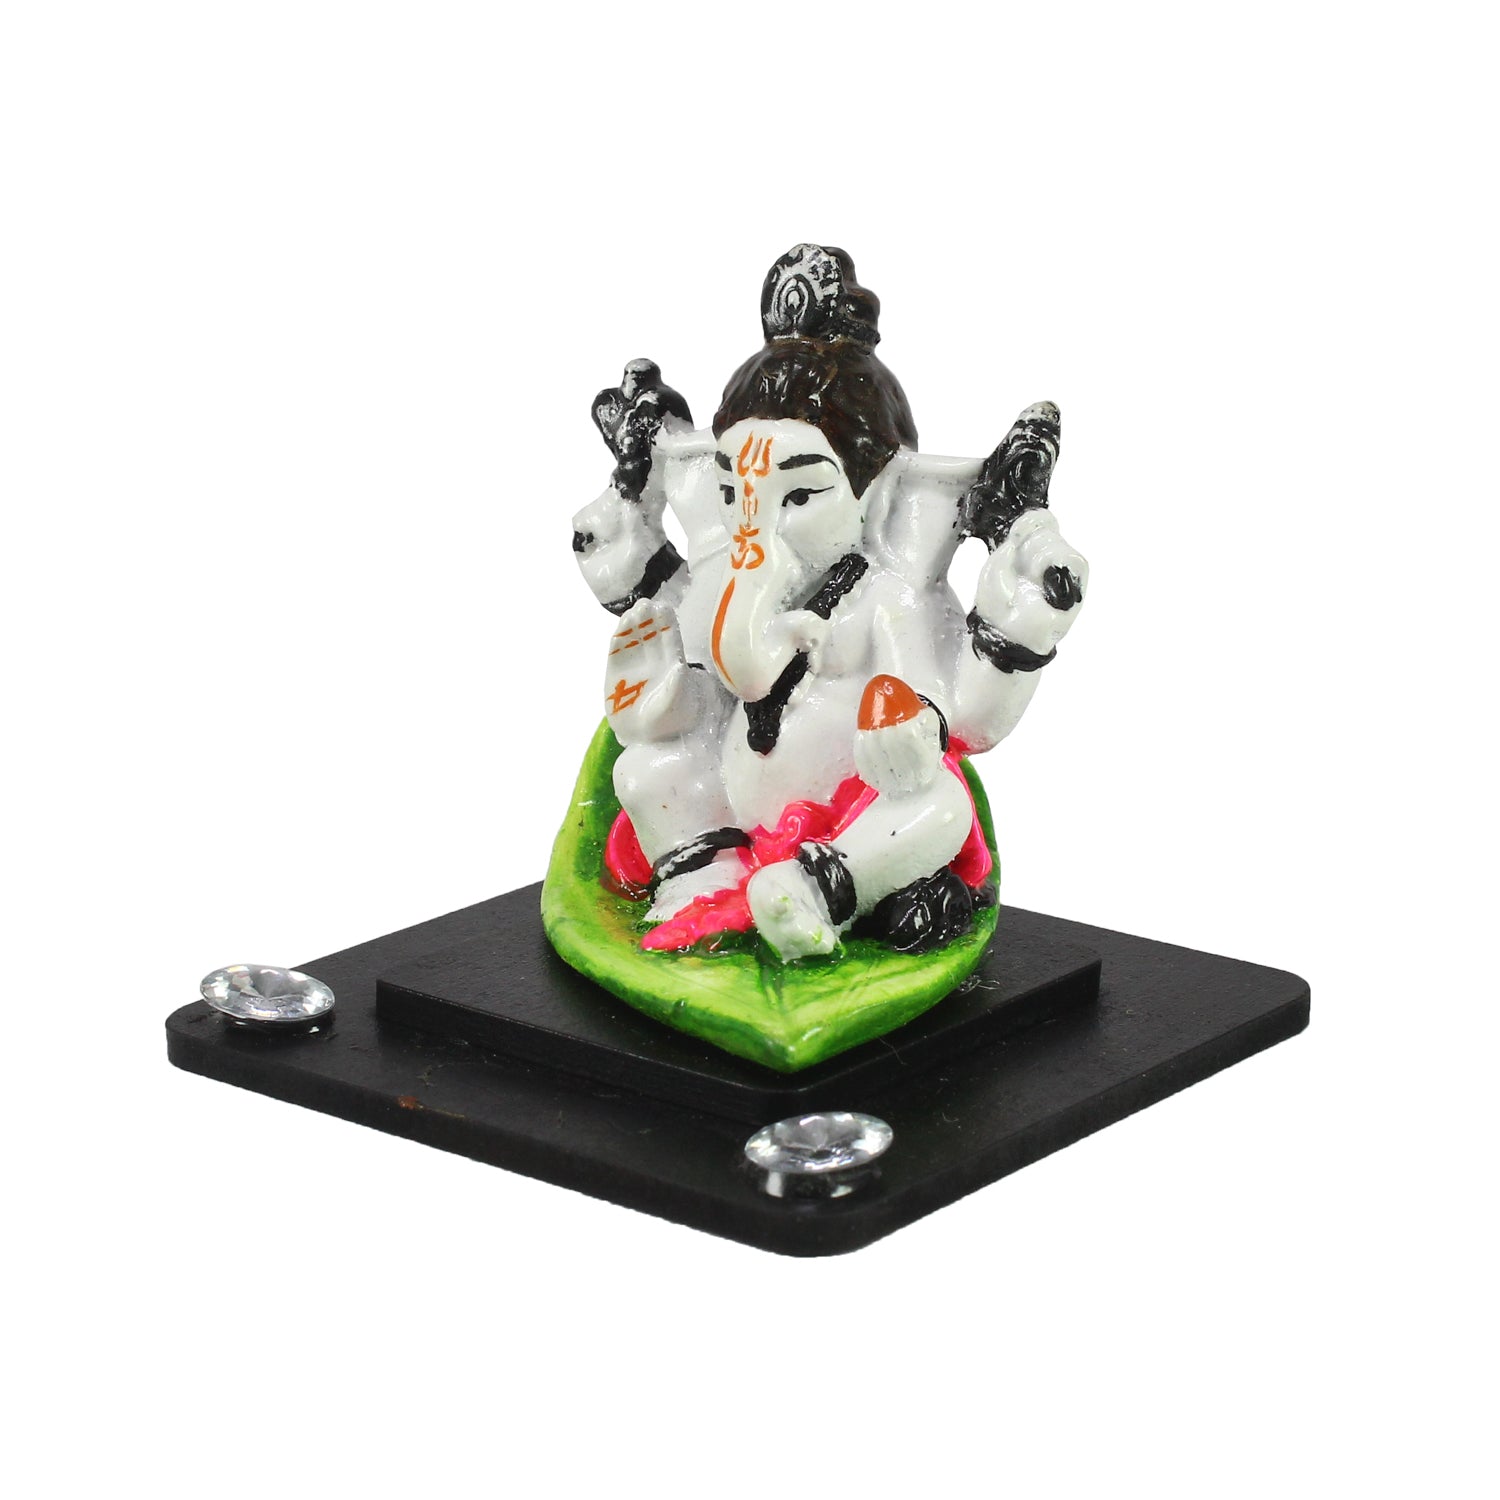 Decorative Lord Ganesha Idol For Car Dashboard, Home Temple, And Office Desks 3